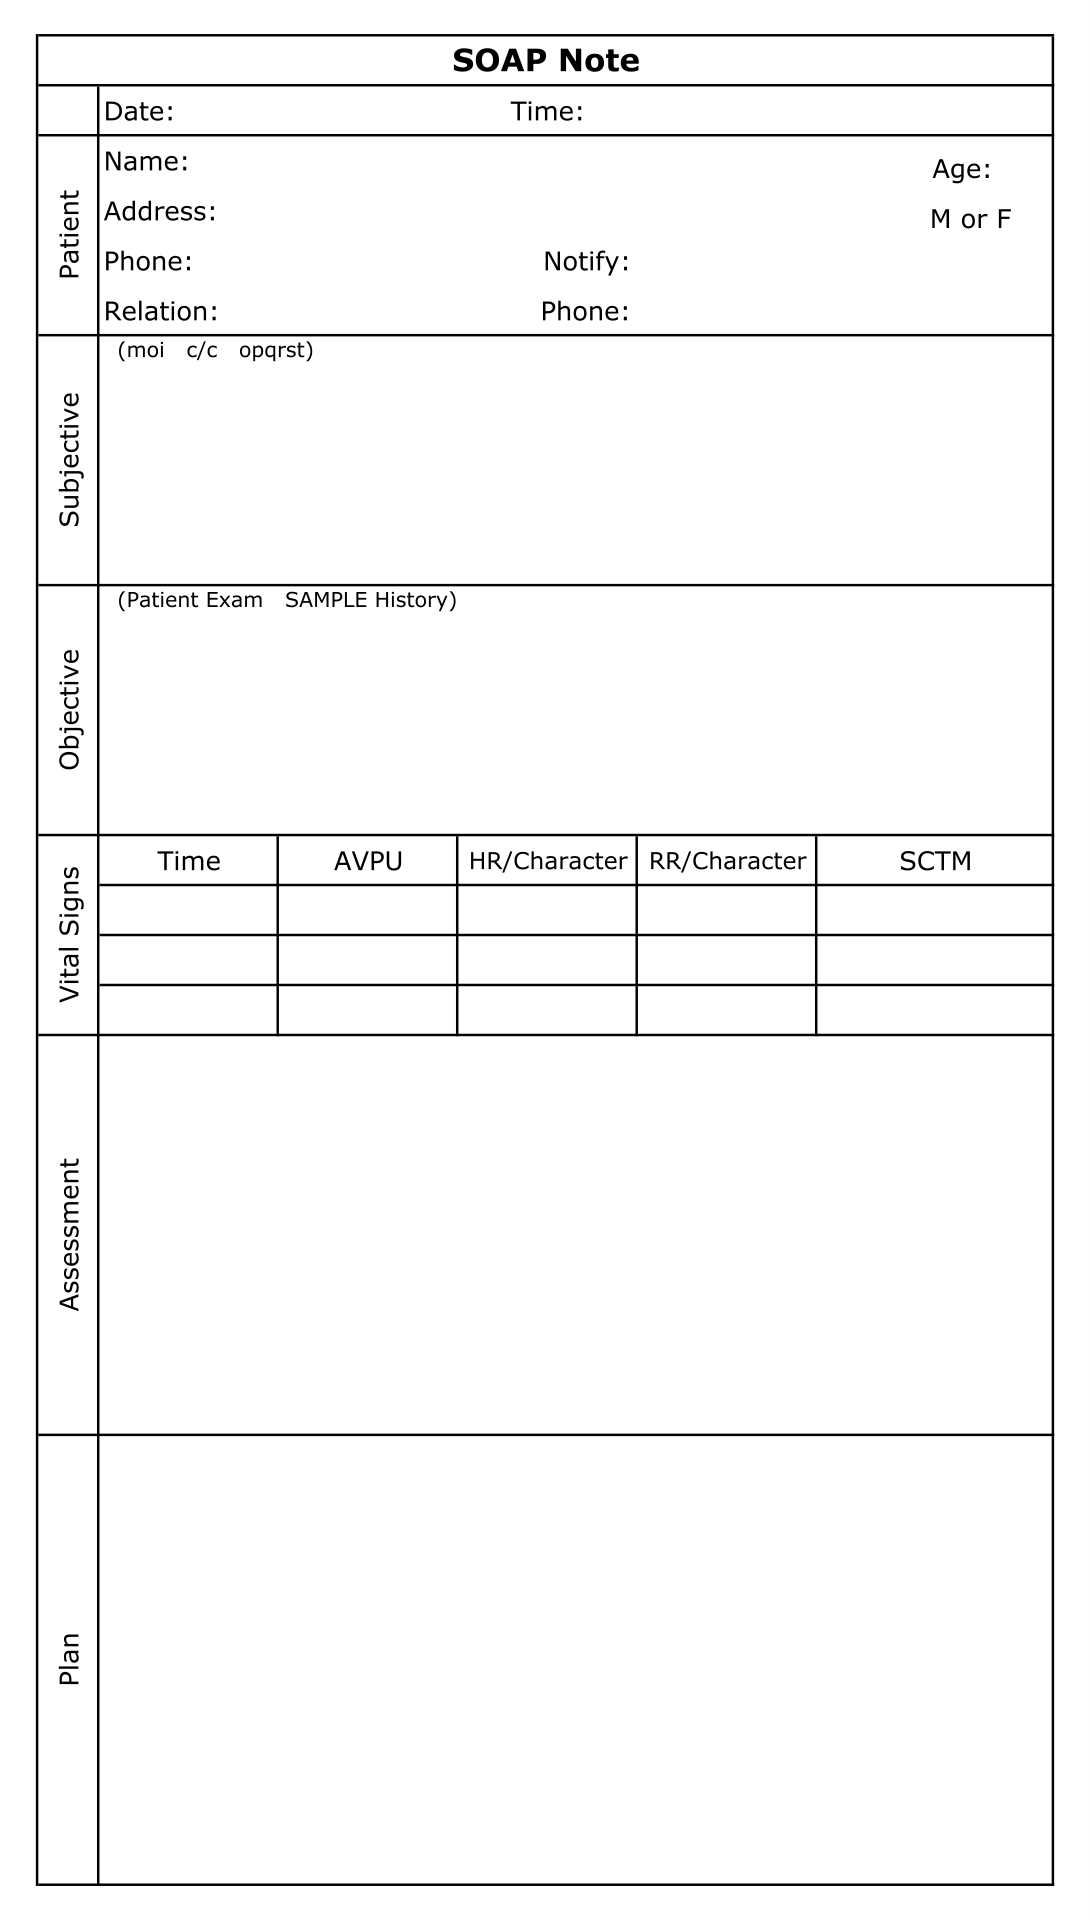 Soap Notes Counseling Template